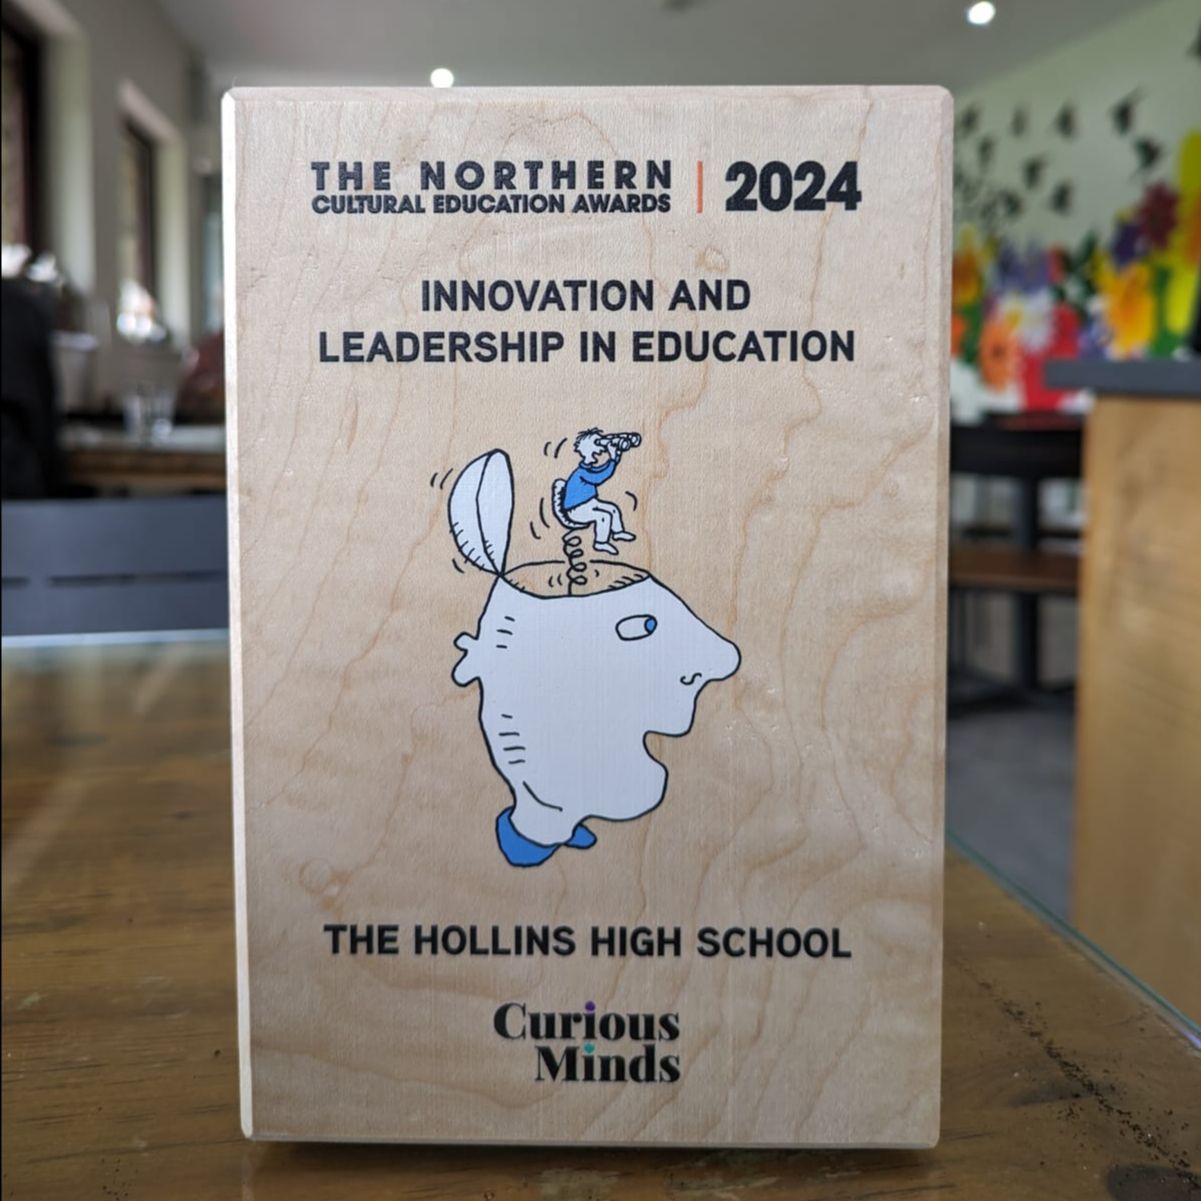 The Hollins High School was awarded the Innovation and Leadership in Education 2024 Award for their Cohesion through Creativity Initiative